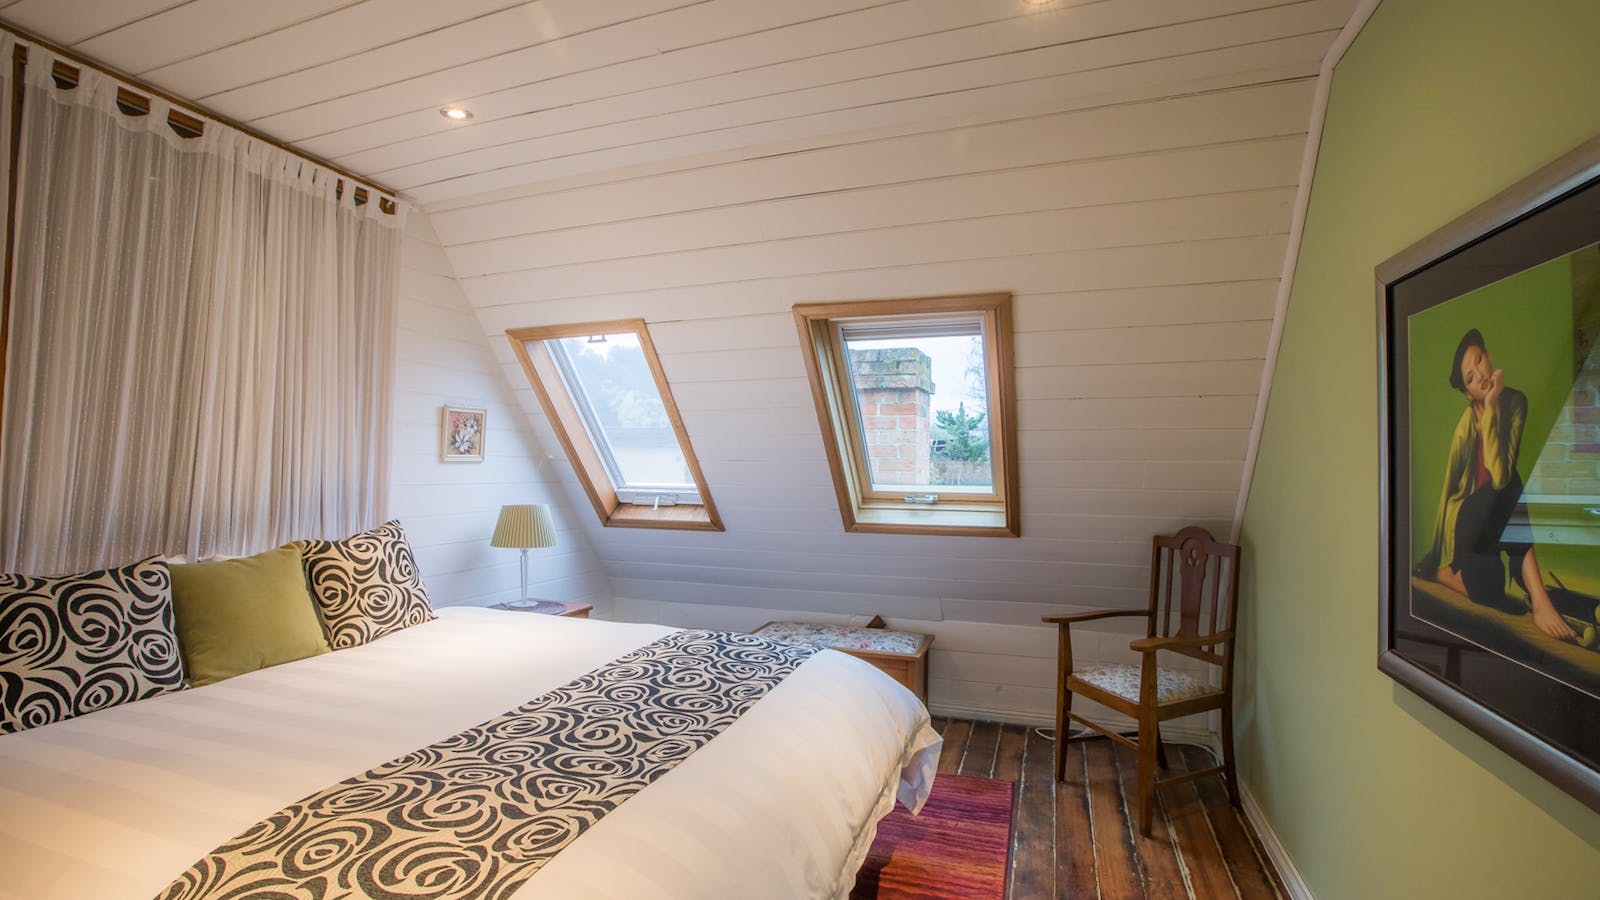 The Main bedroom is on the mezzanine level and has a King size bed